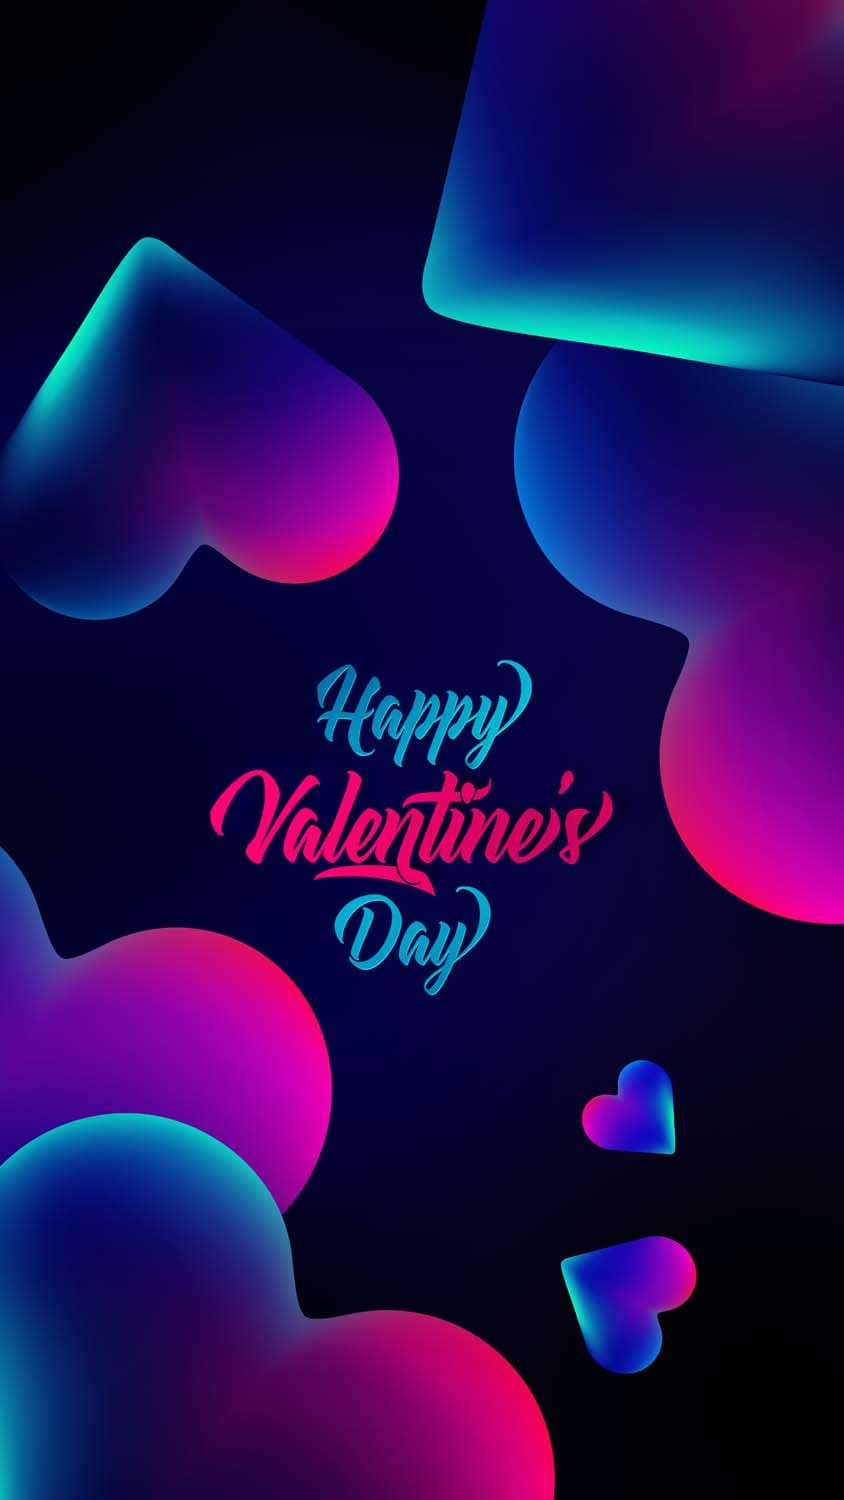 Happy Valentine Day IPhone Wallpaper HD  IPhone Wallpapers